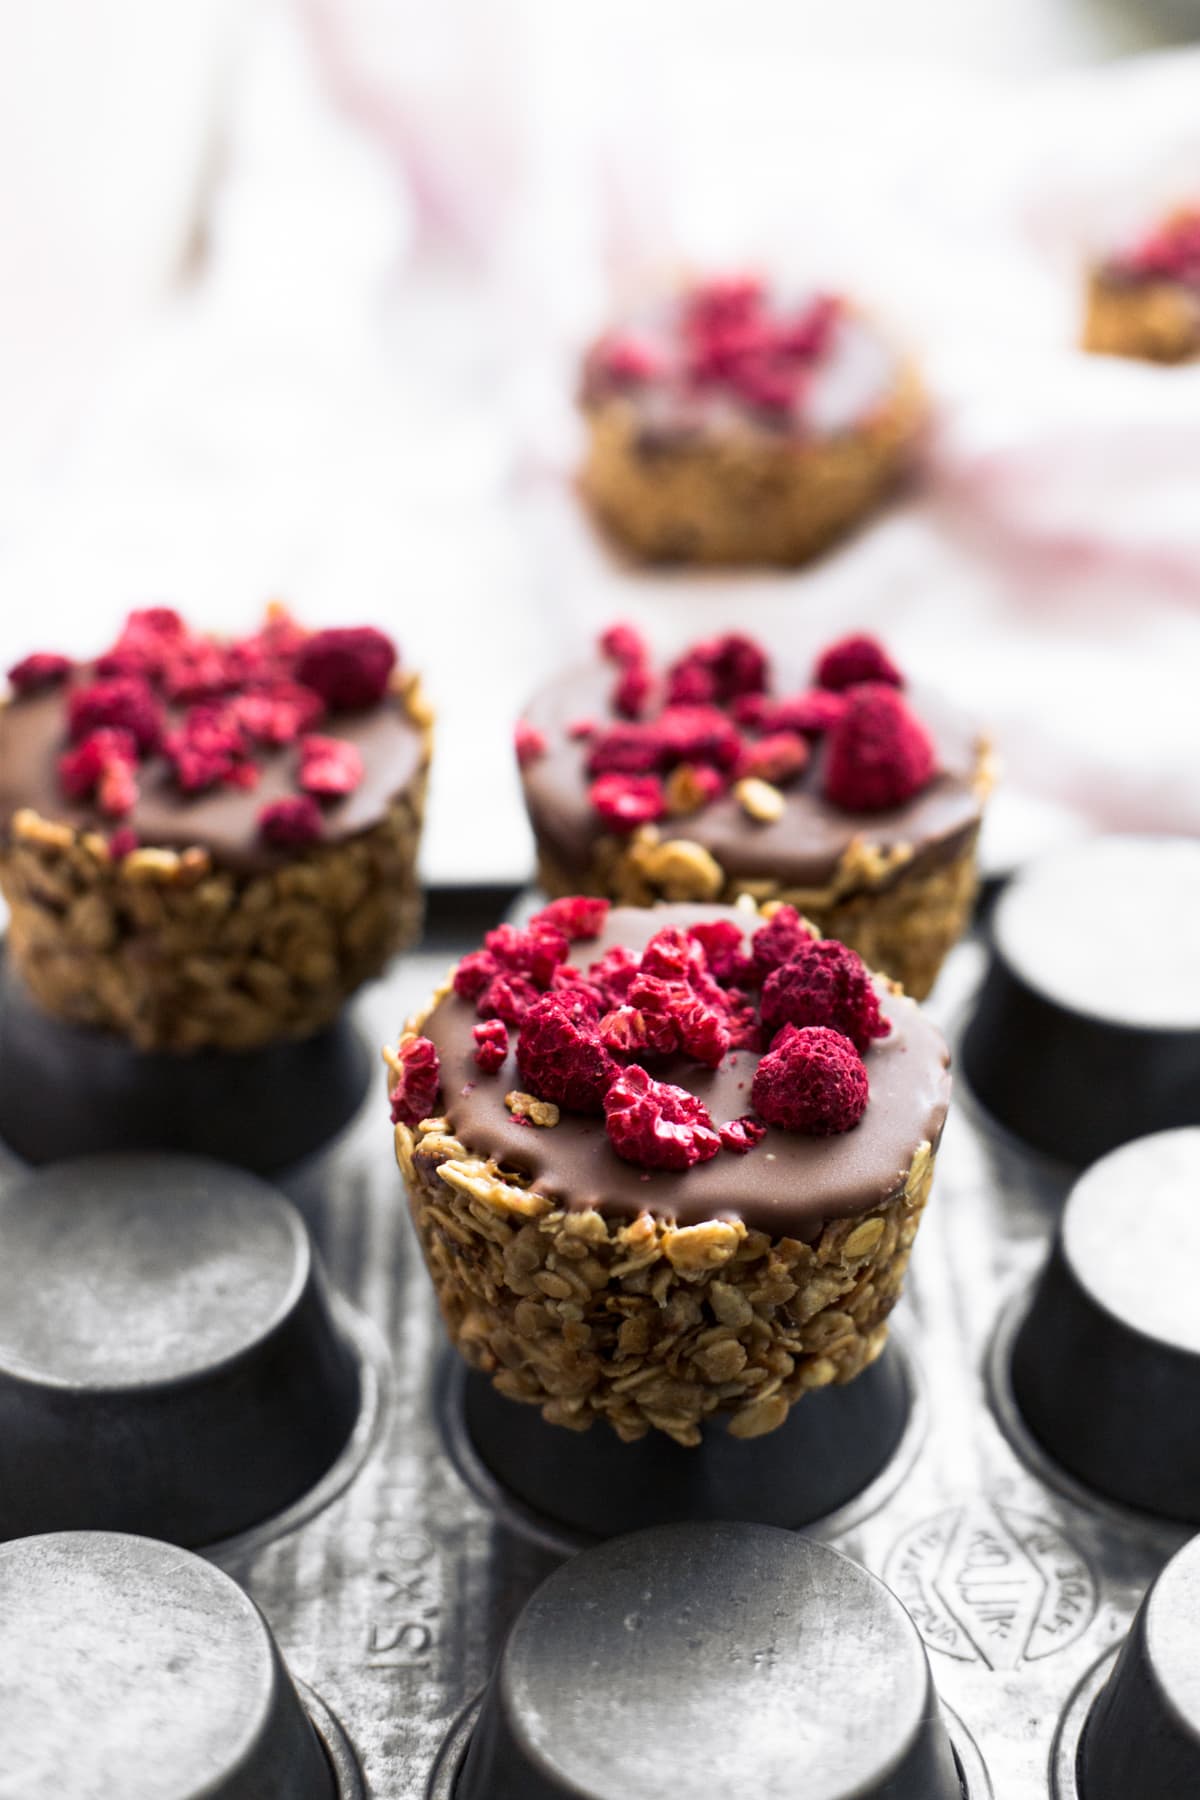 Simple No-Bake Vegan Granola Cups filled with Nut Butter of your choice and topped off with Chocolate. Read in under an hour. #vegan #granola #oats #chocolate #snacks #healthy #peanutbutter #nobake #slice #fridge #veganrecipes